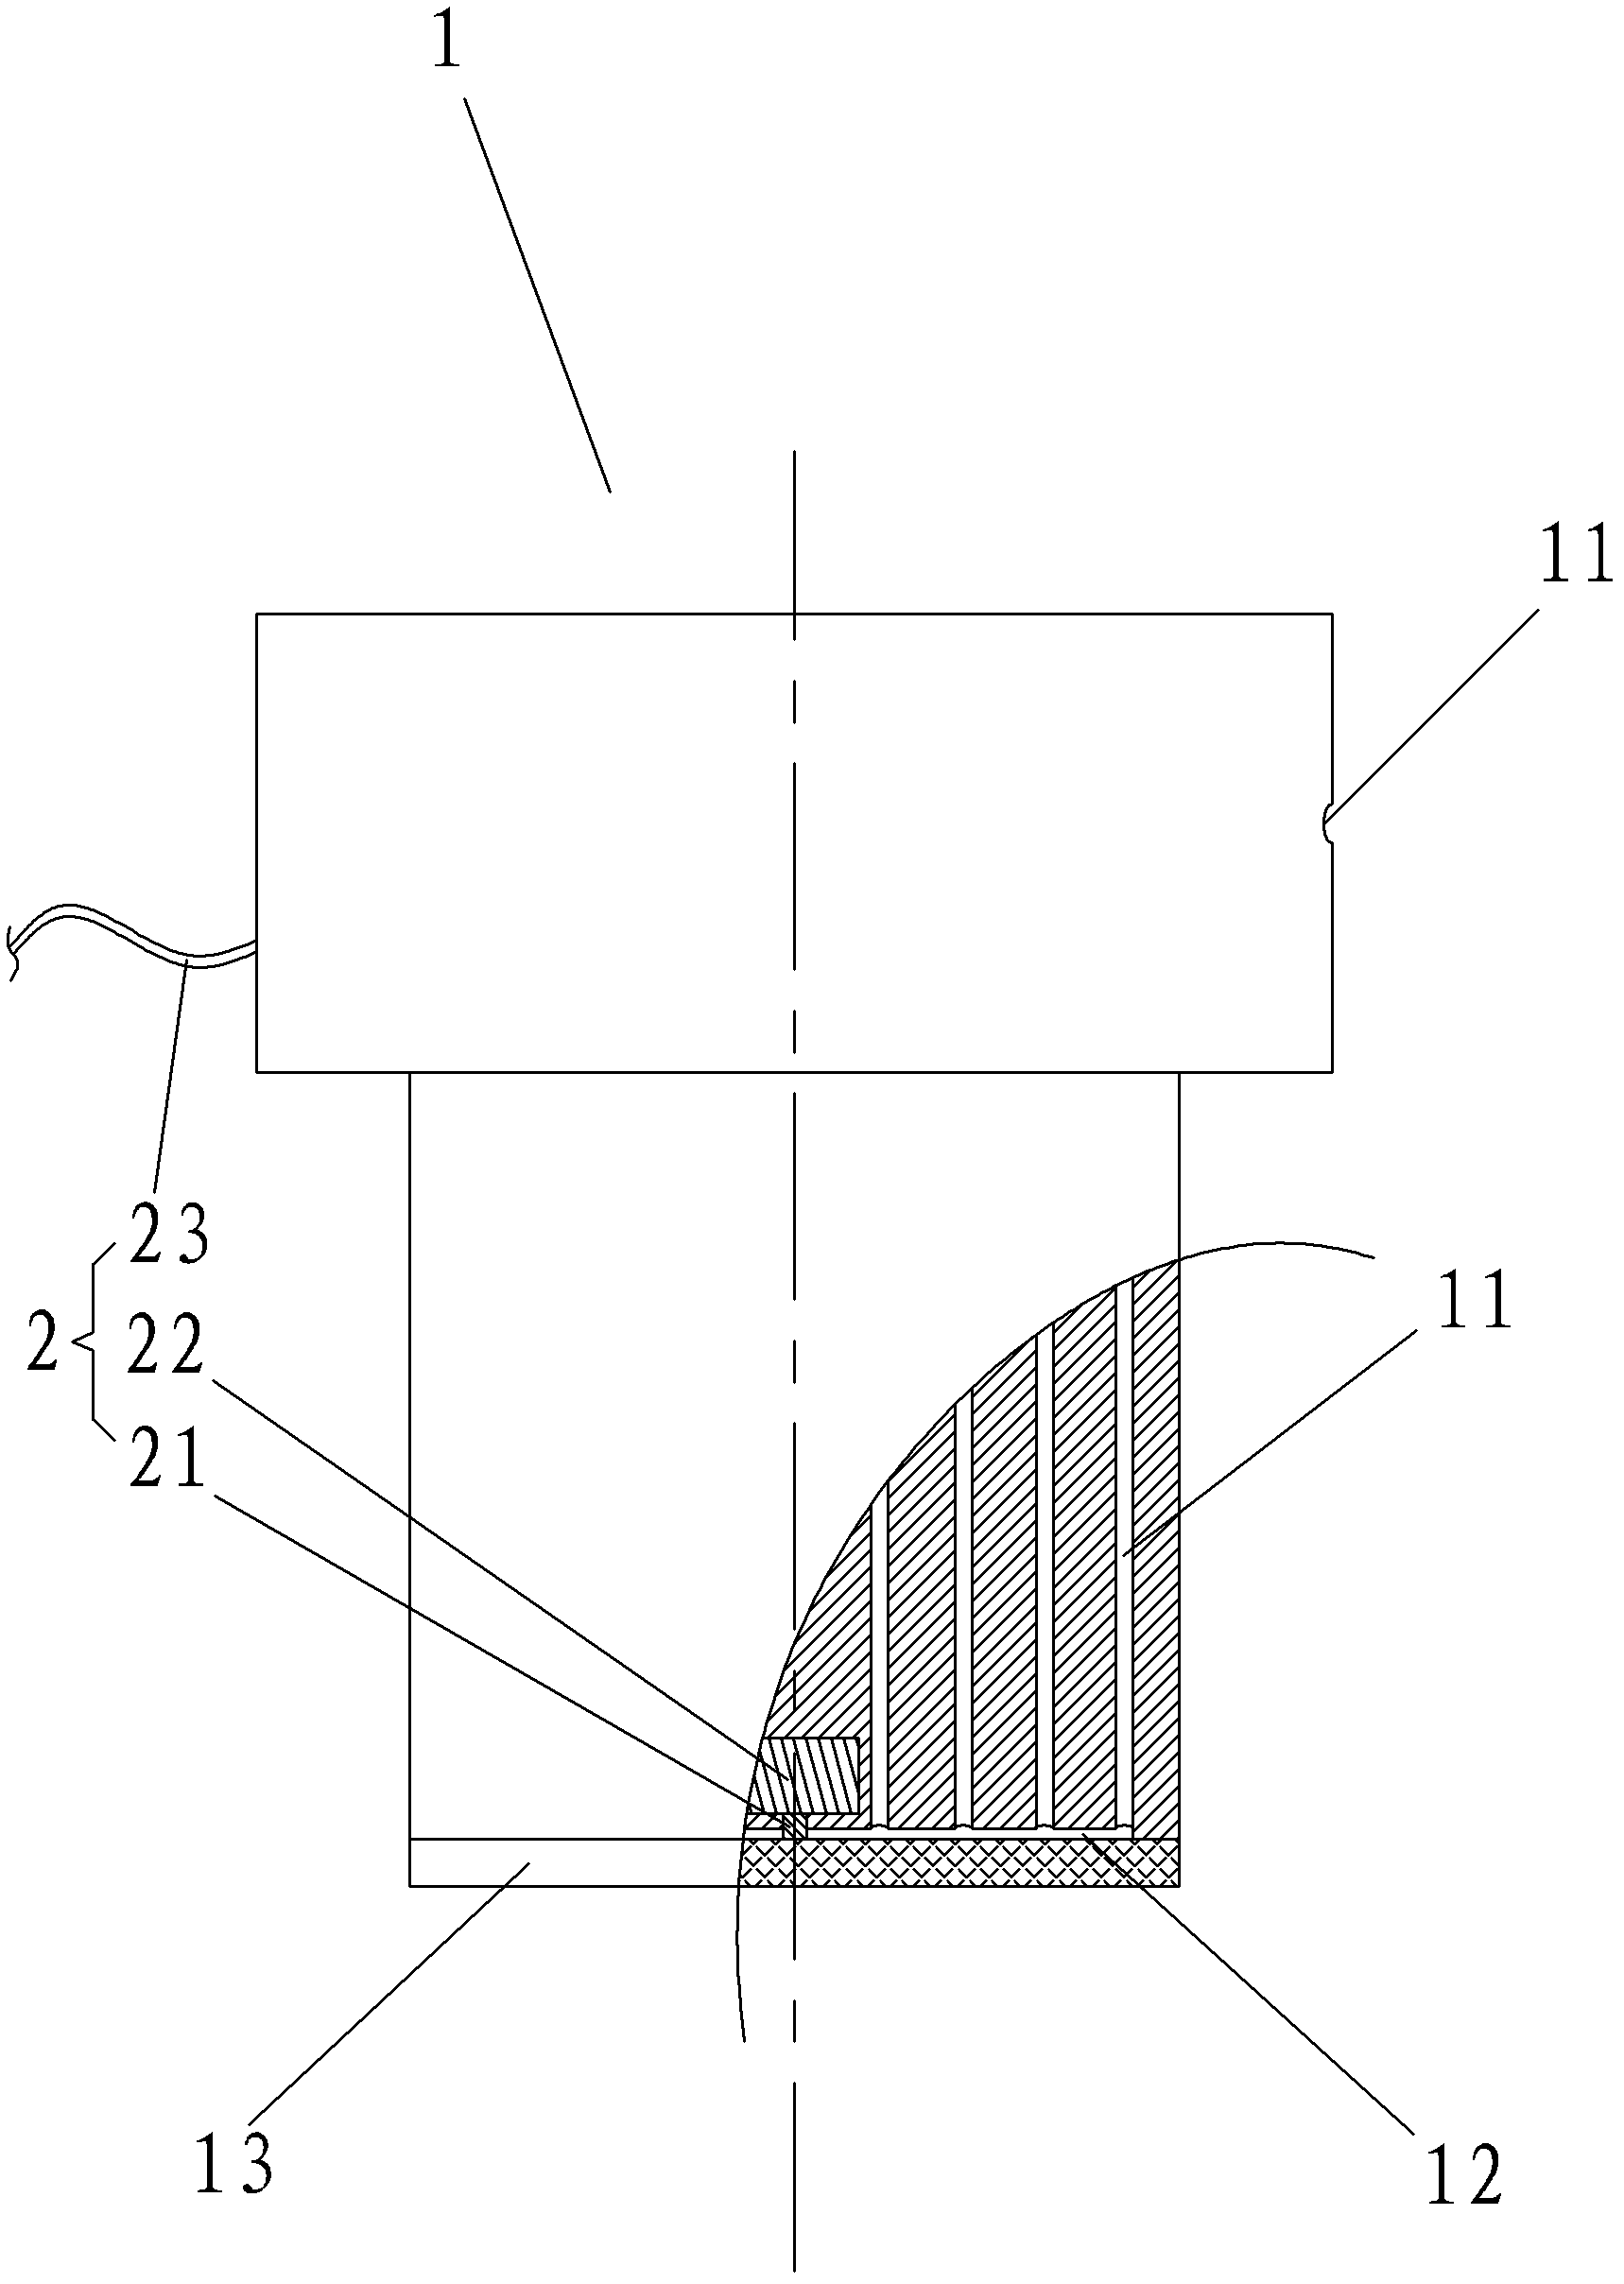 Pressure-bearing type acoustic detection probe used for engineering